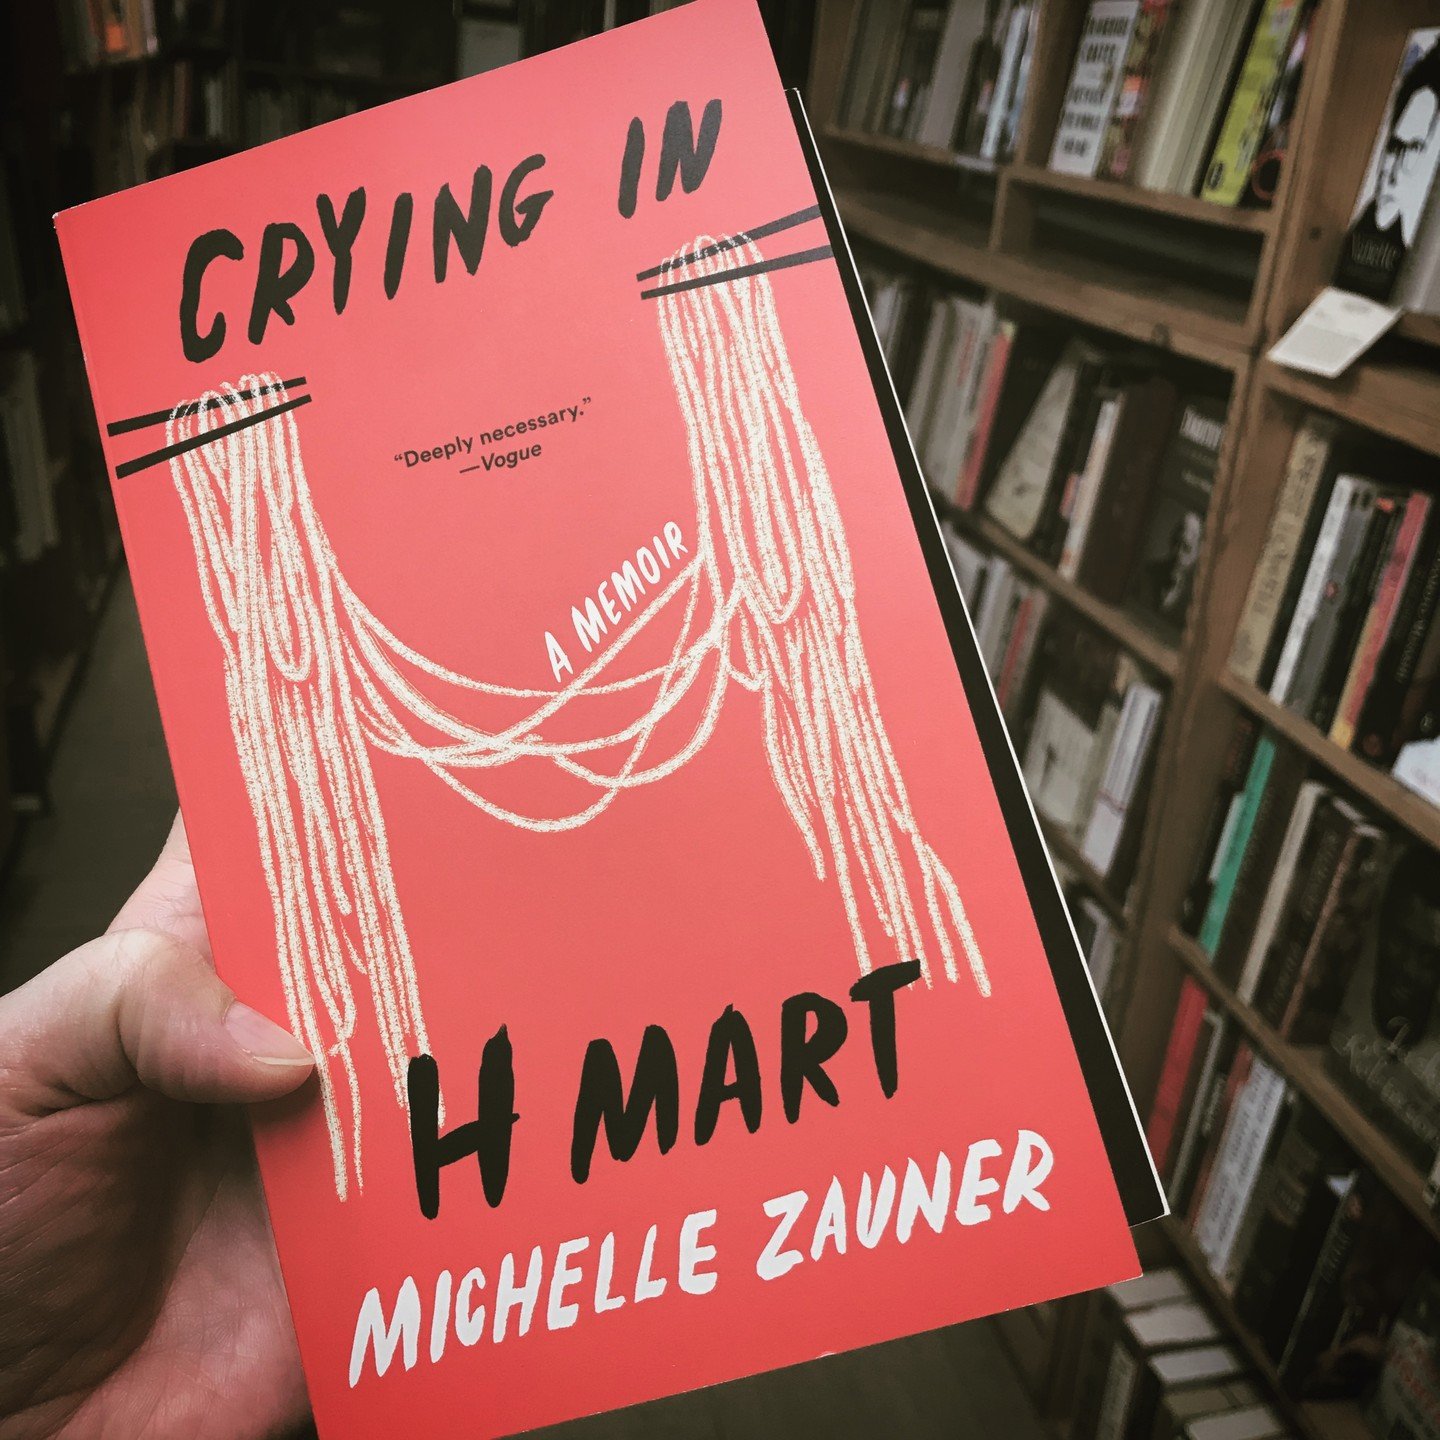 I read a lot of memoirs last year. This one, Crying in H Mart by Michelle Zauner, was one of my favorites. I found this pick in my camera roll and realized I forgot to post it. 
That means today you get a book recommendation. If you're into memoirs, 